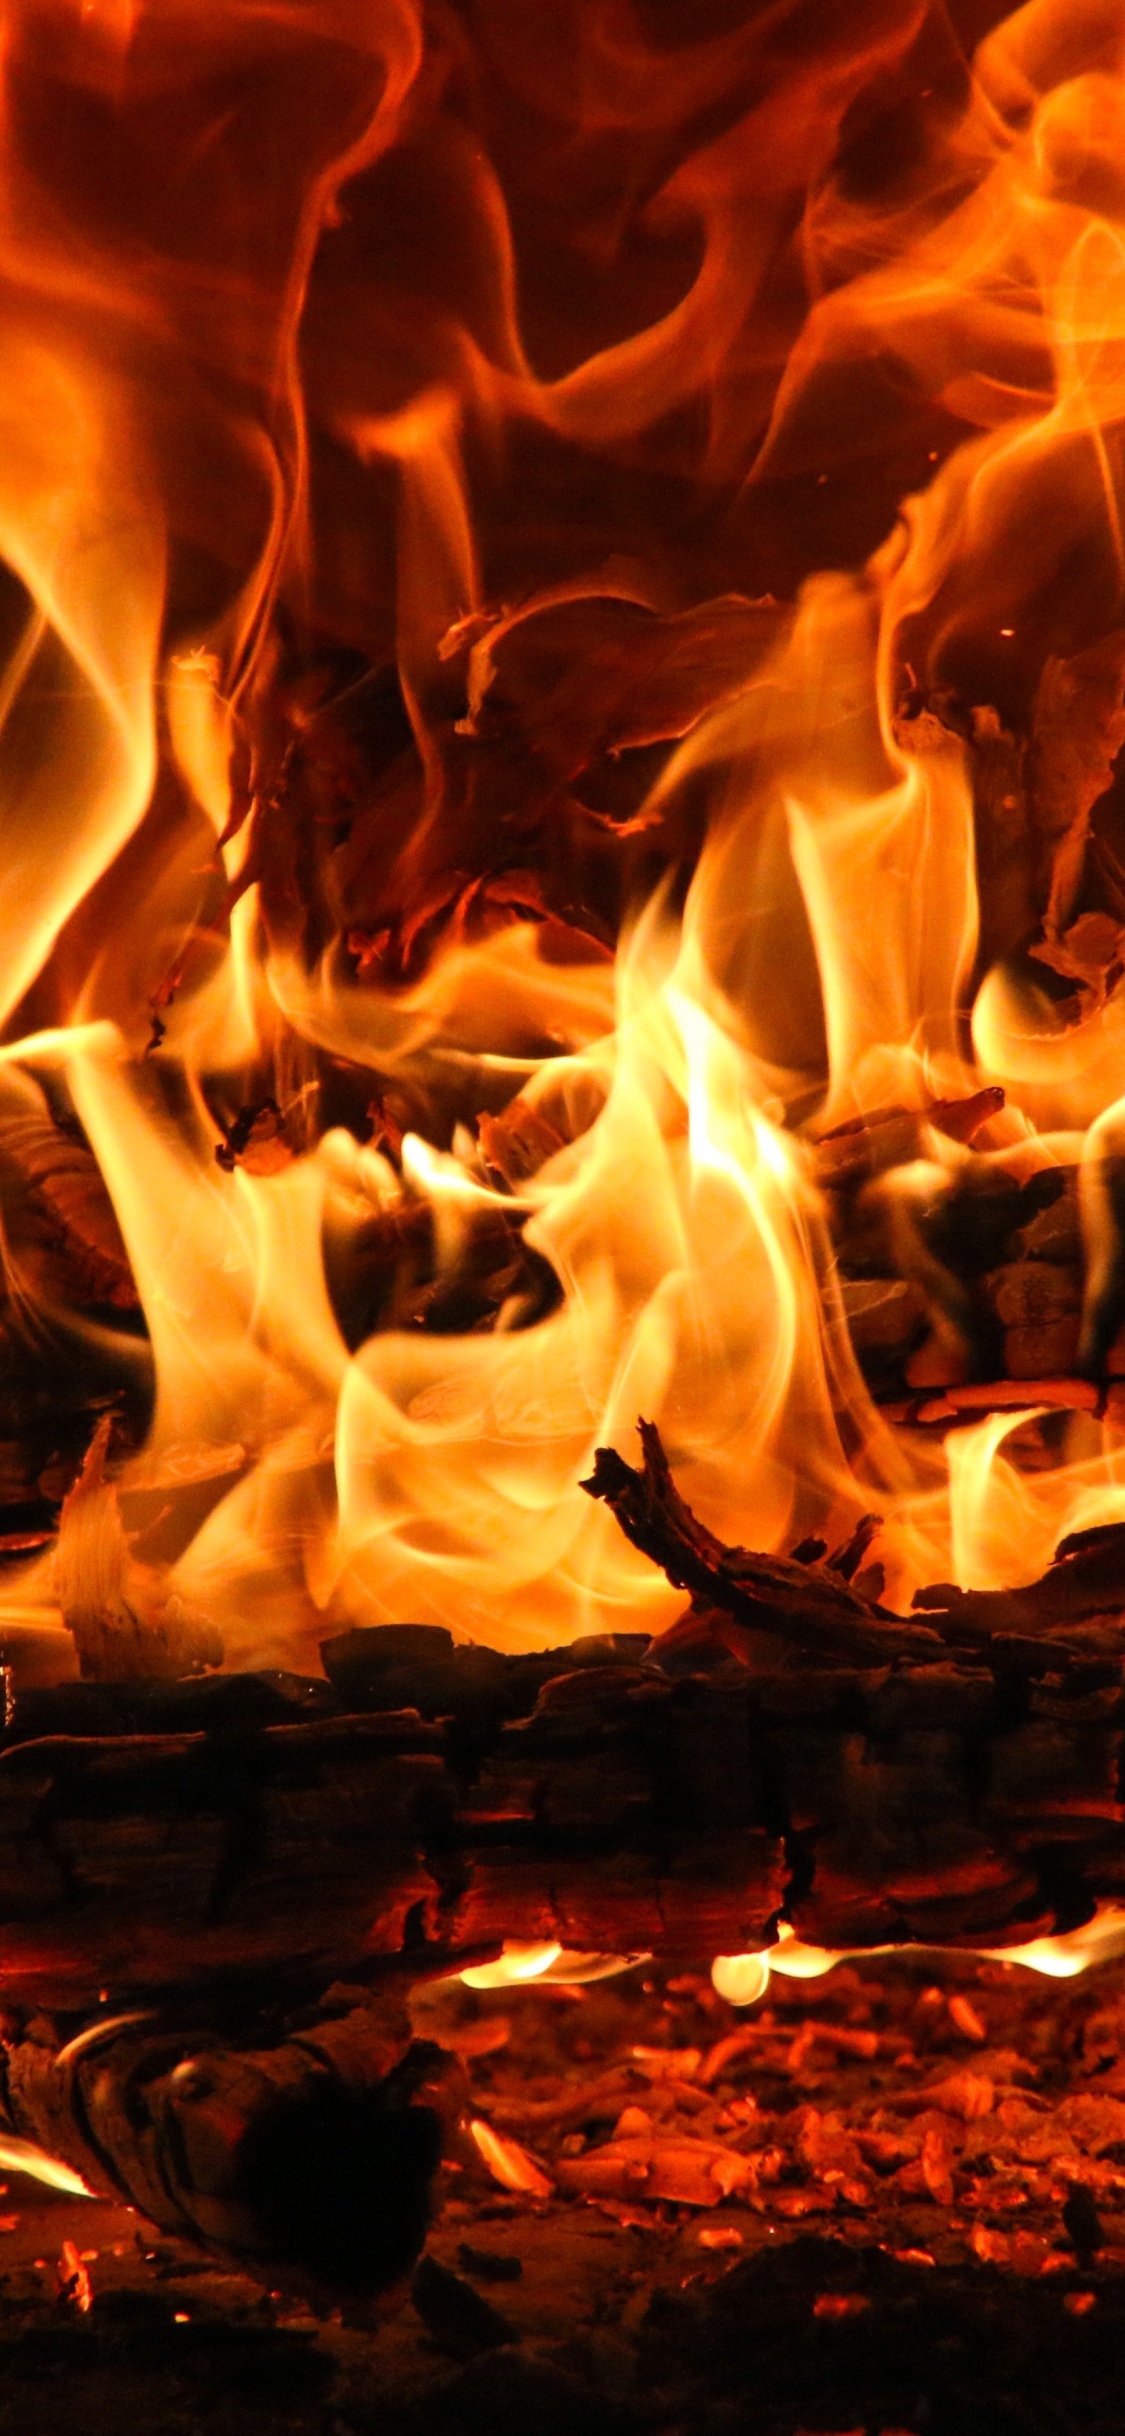 Burning Wood on Brown Soil. Wallpaper in 1125x2436 Resolution